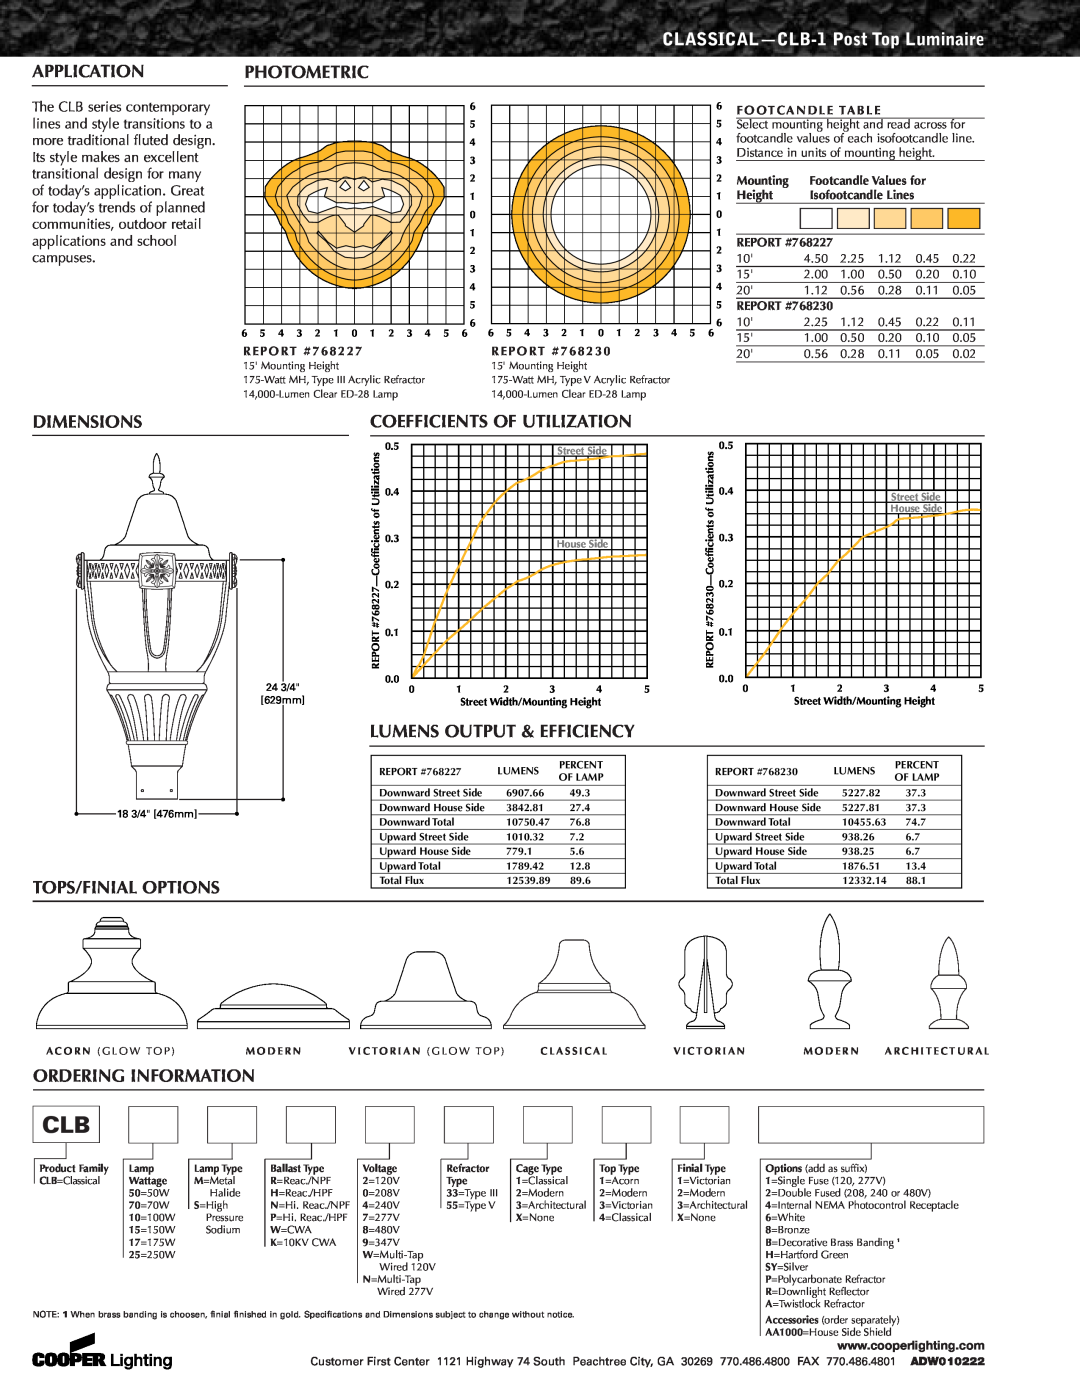 Cooper Lighting Classical CLB-1 CLASSICAL-CLB-1Post Top Luminaire, Application, Dimensions, Coefficients Of Utilization 